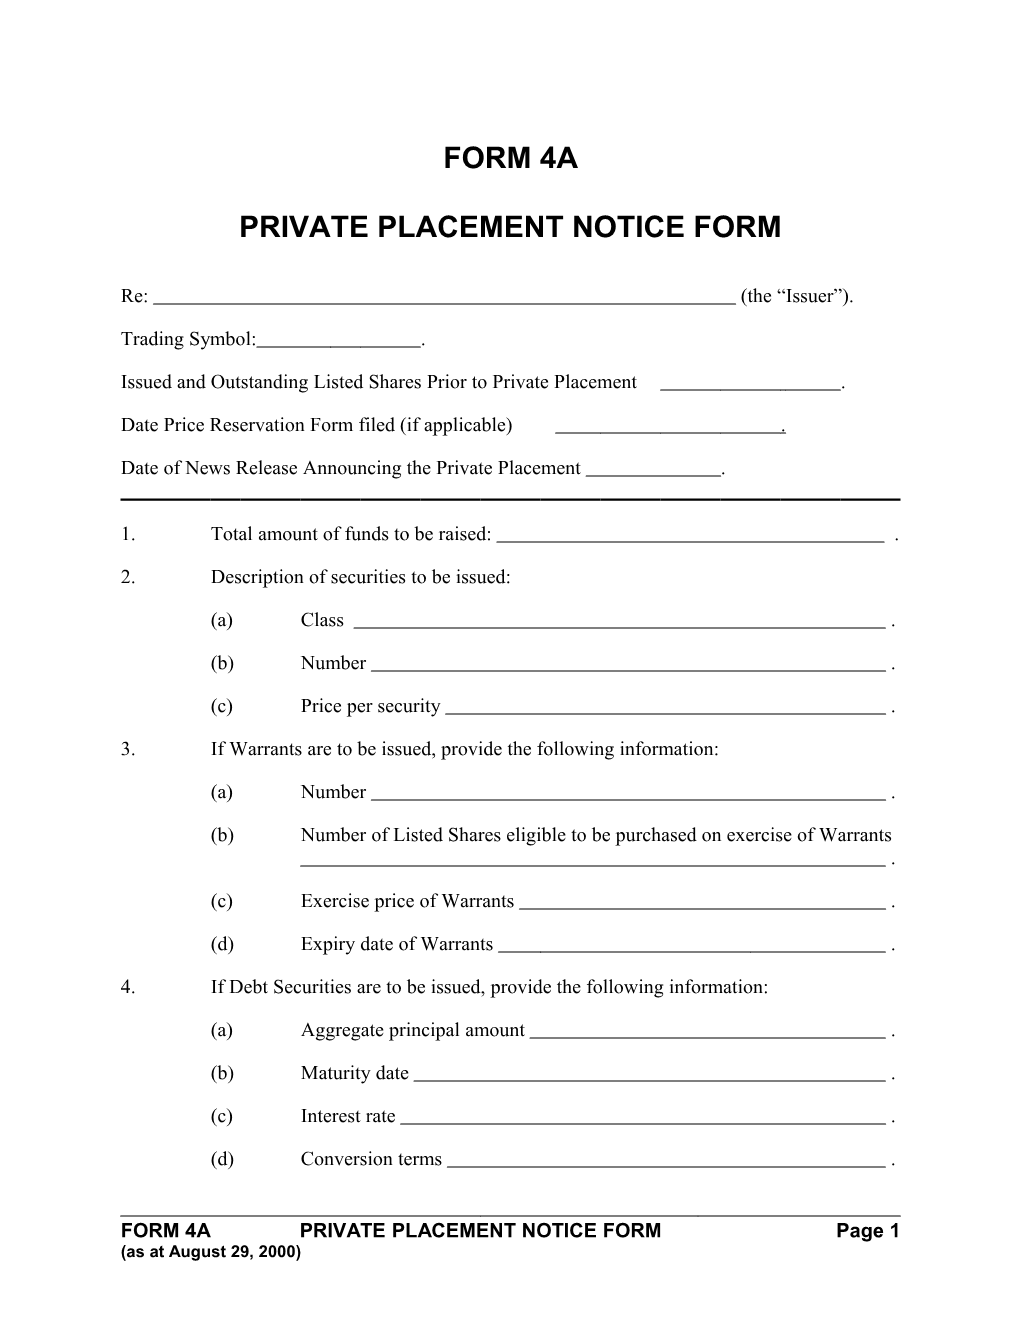 Private Placement Notice Form